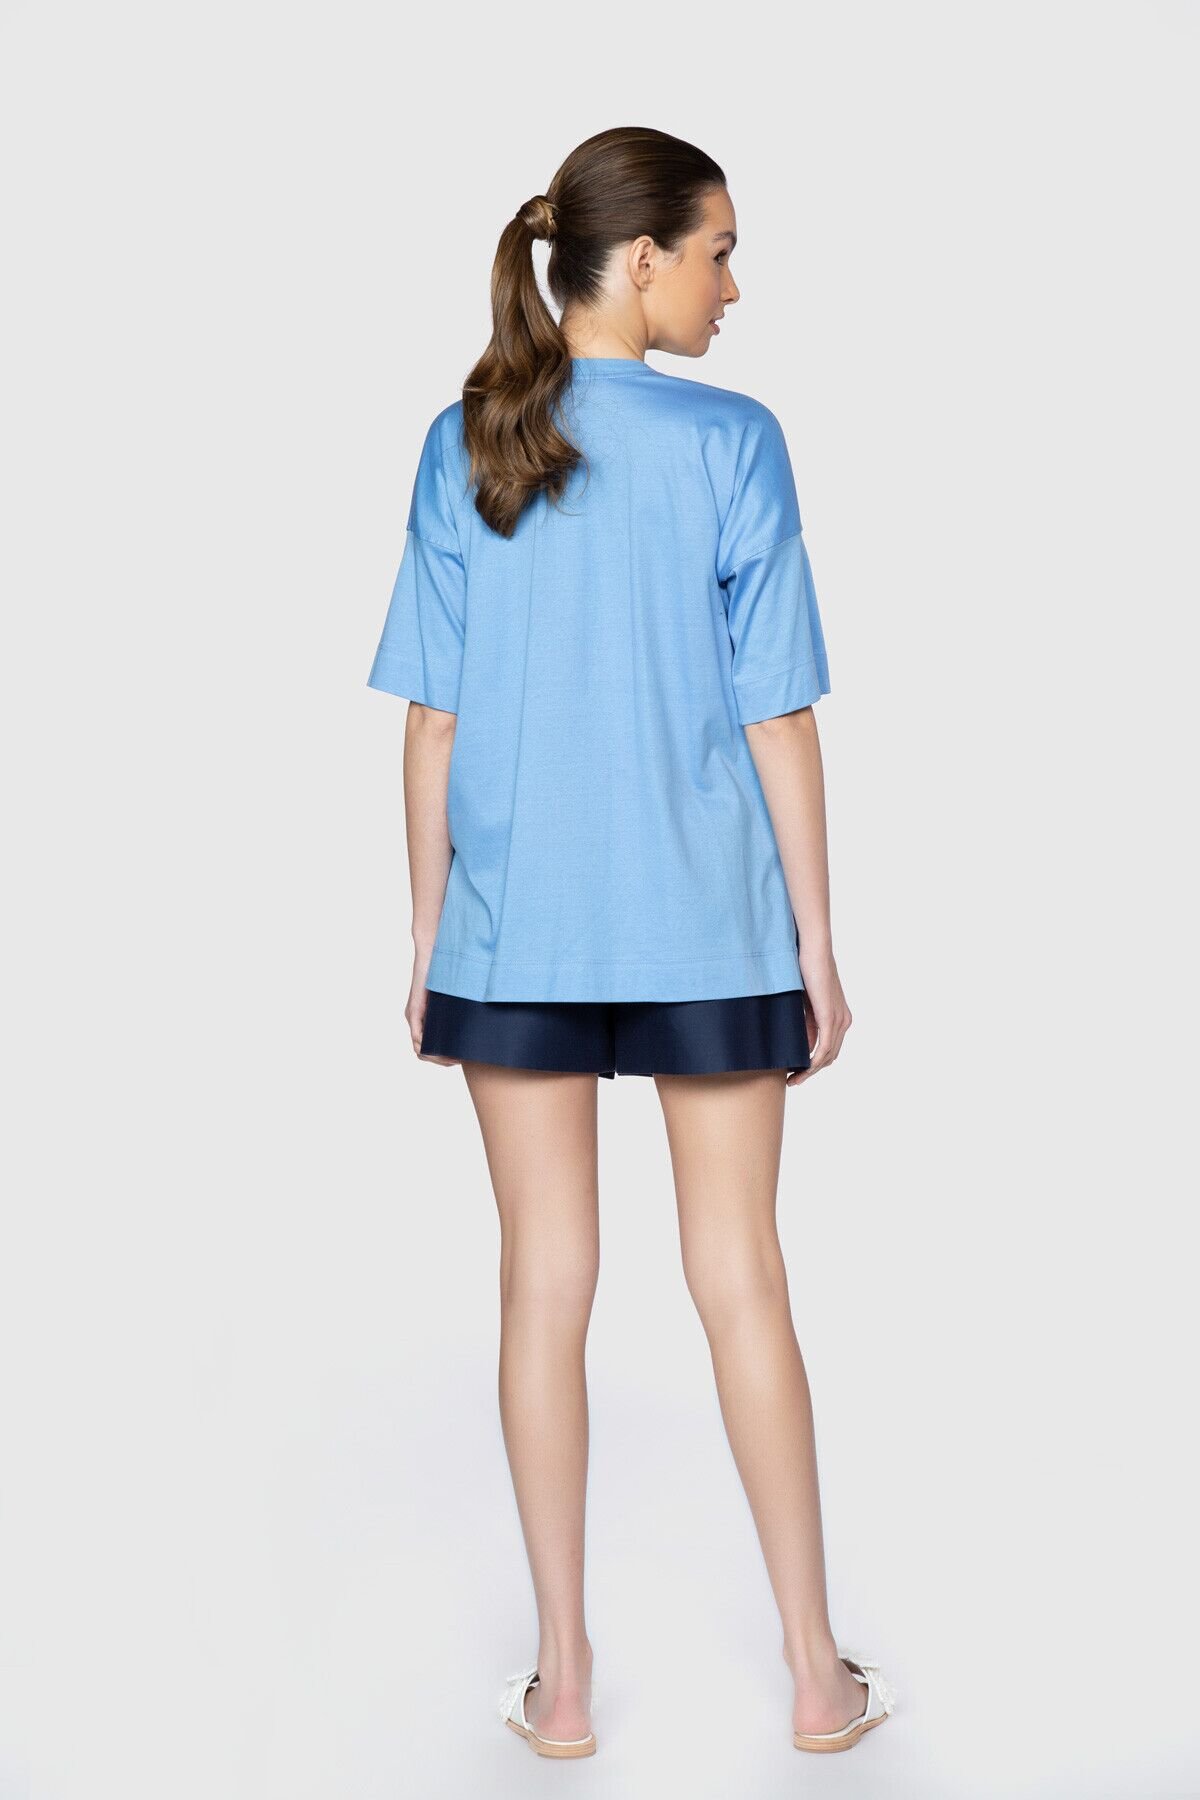 Embroidered Detailed Short Sleeve Blue T-Shirt